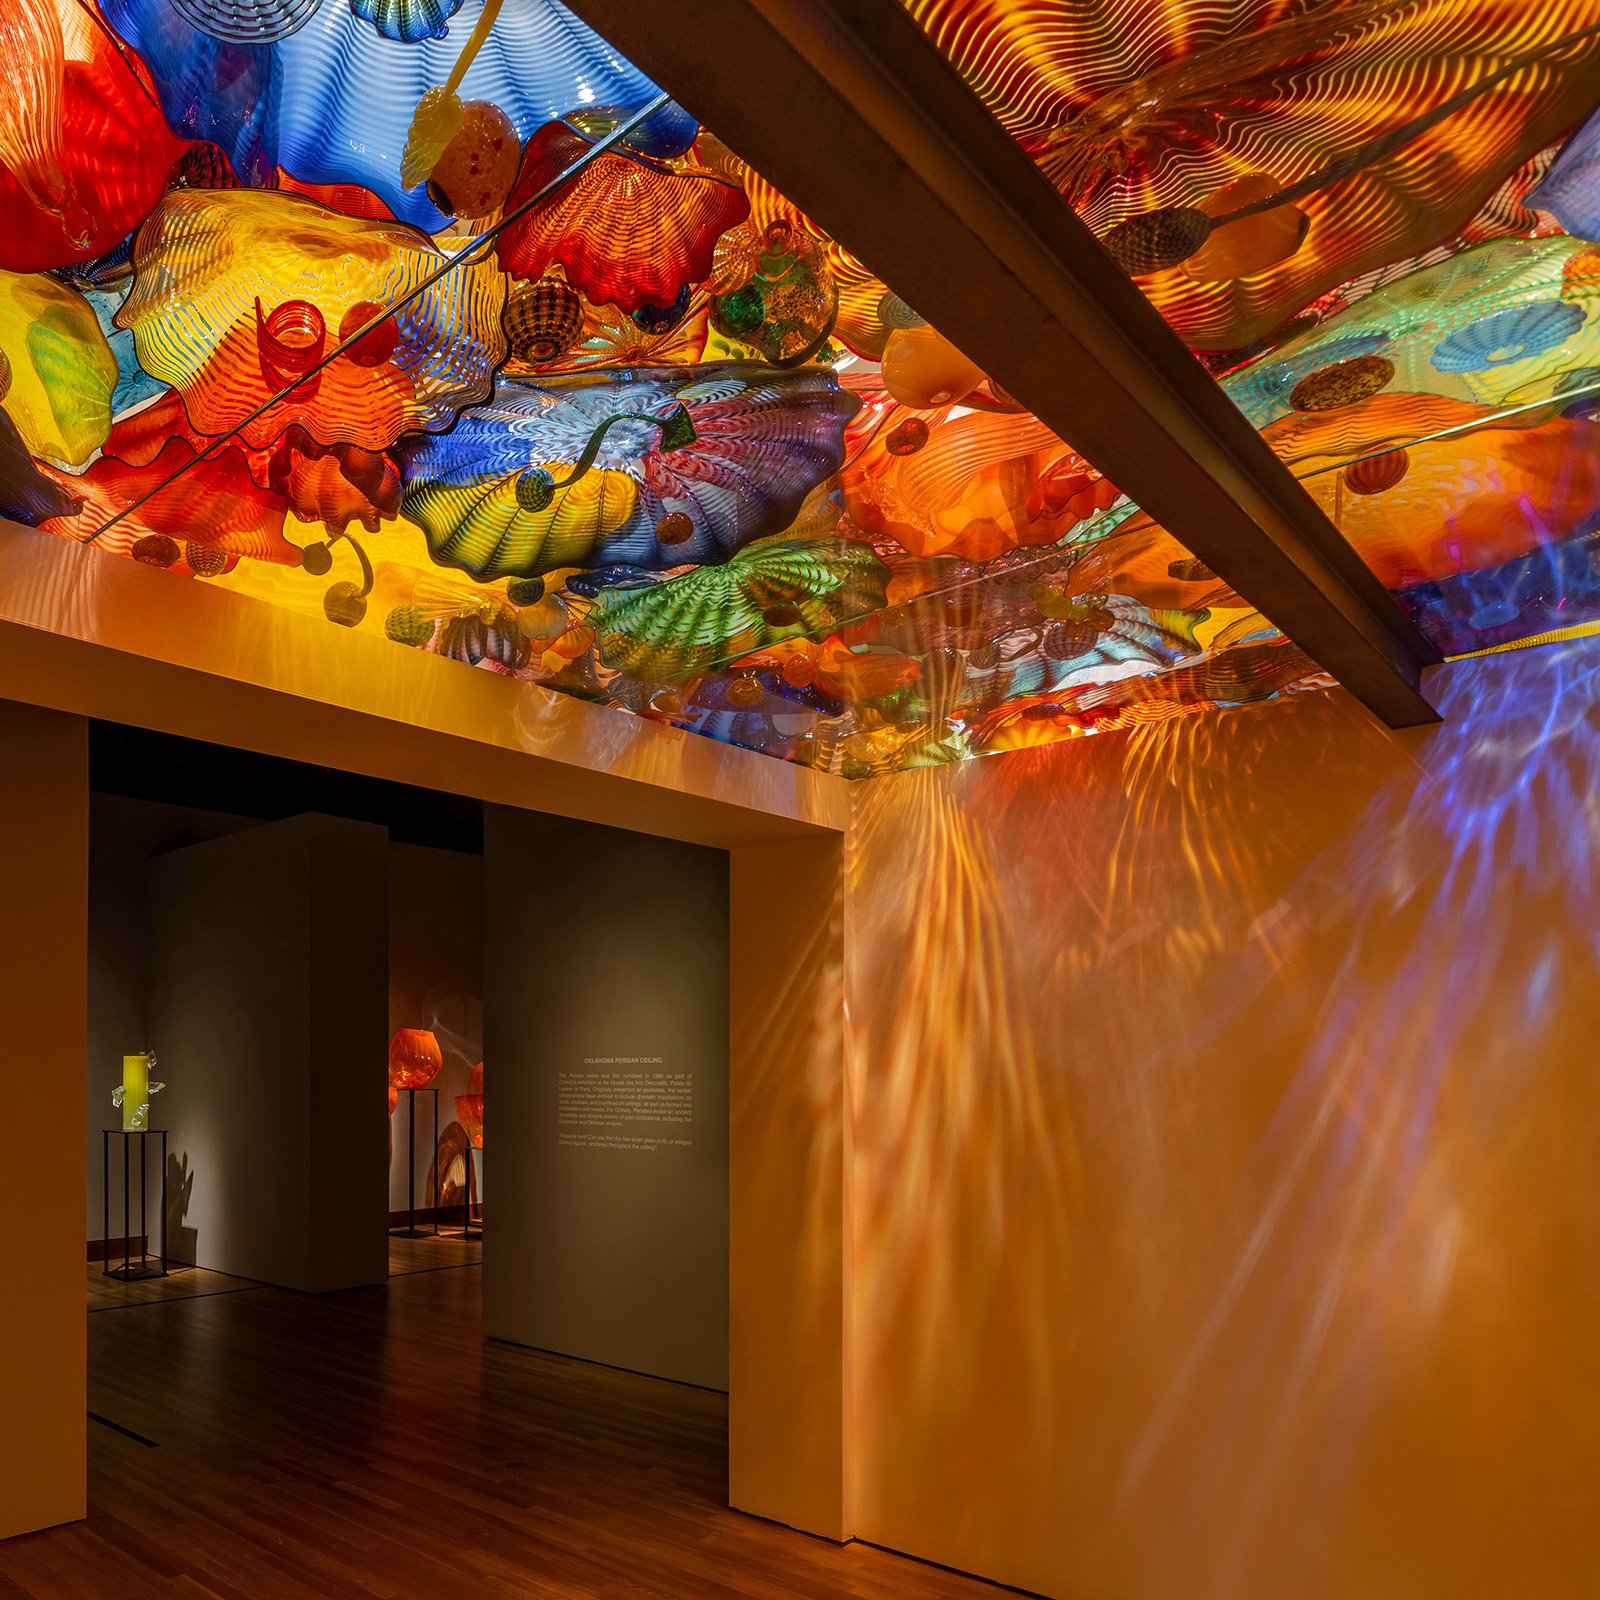 Oklahoma Persian Ceiling (detail), 2002 by Dale Chihuly